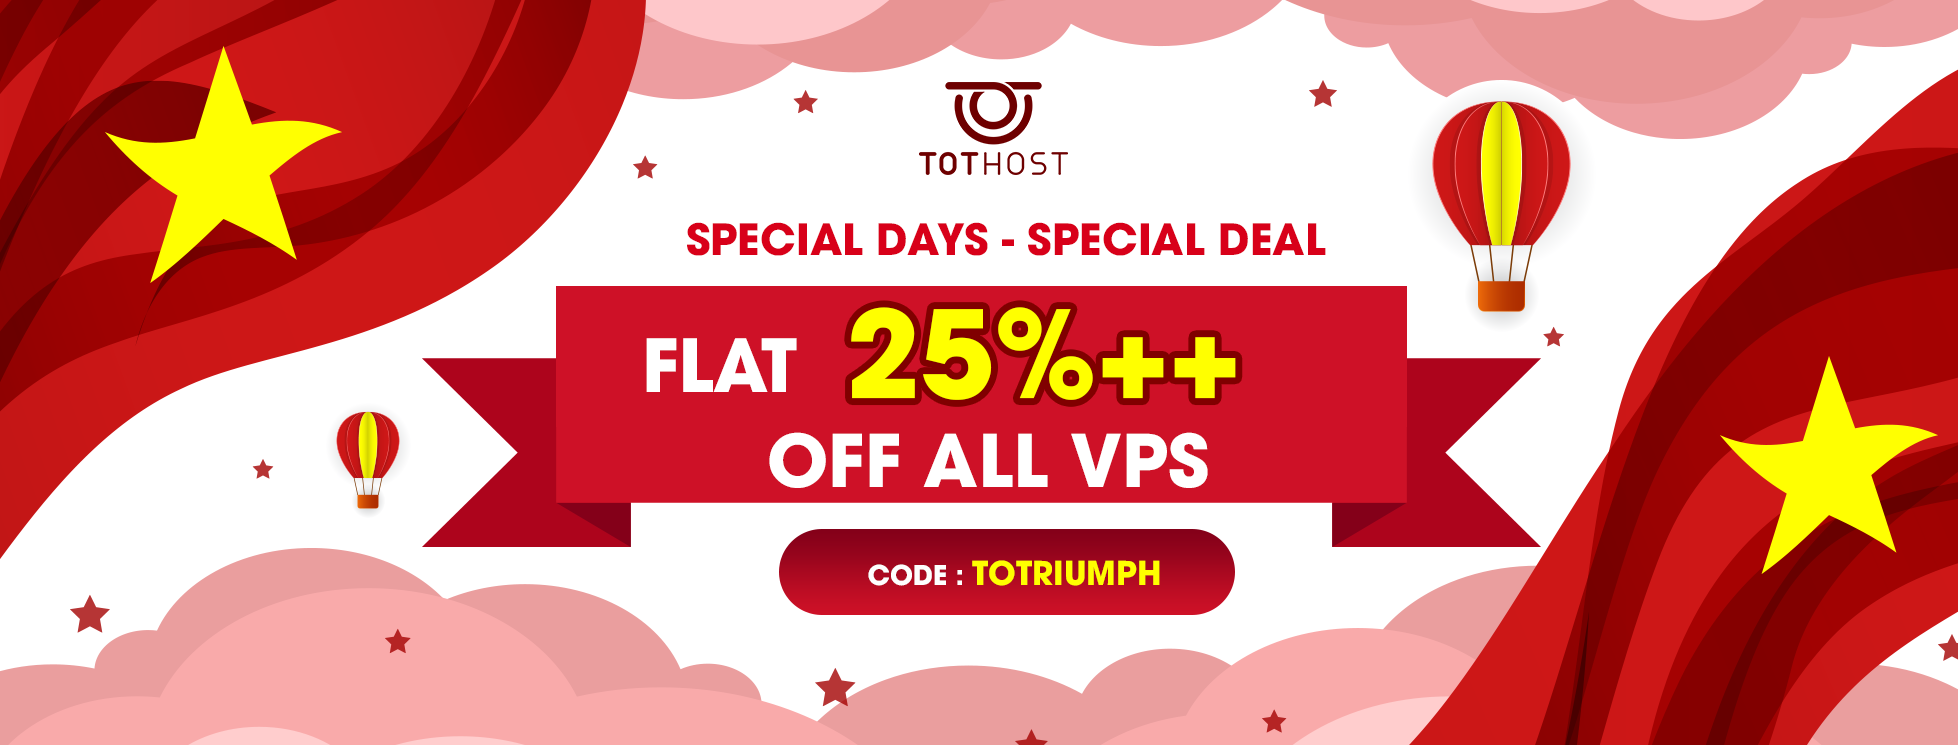 TOTRIUMPH: Special Days - Special VPS Deal